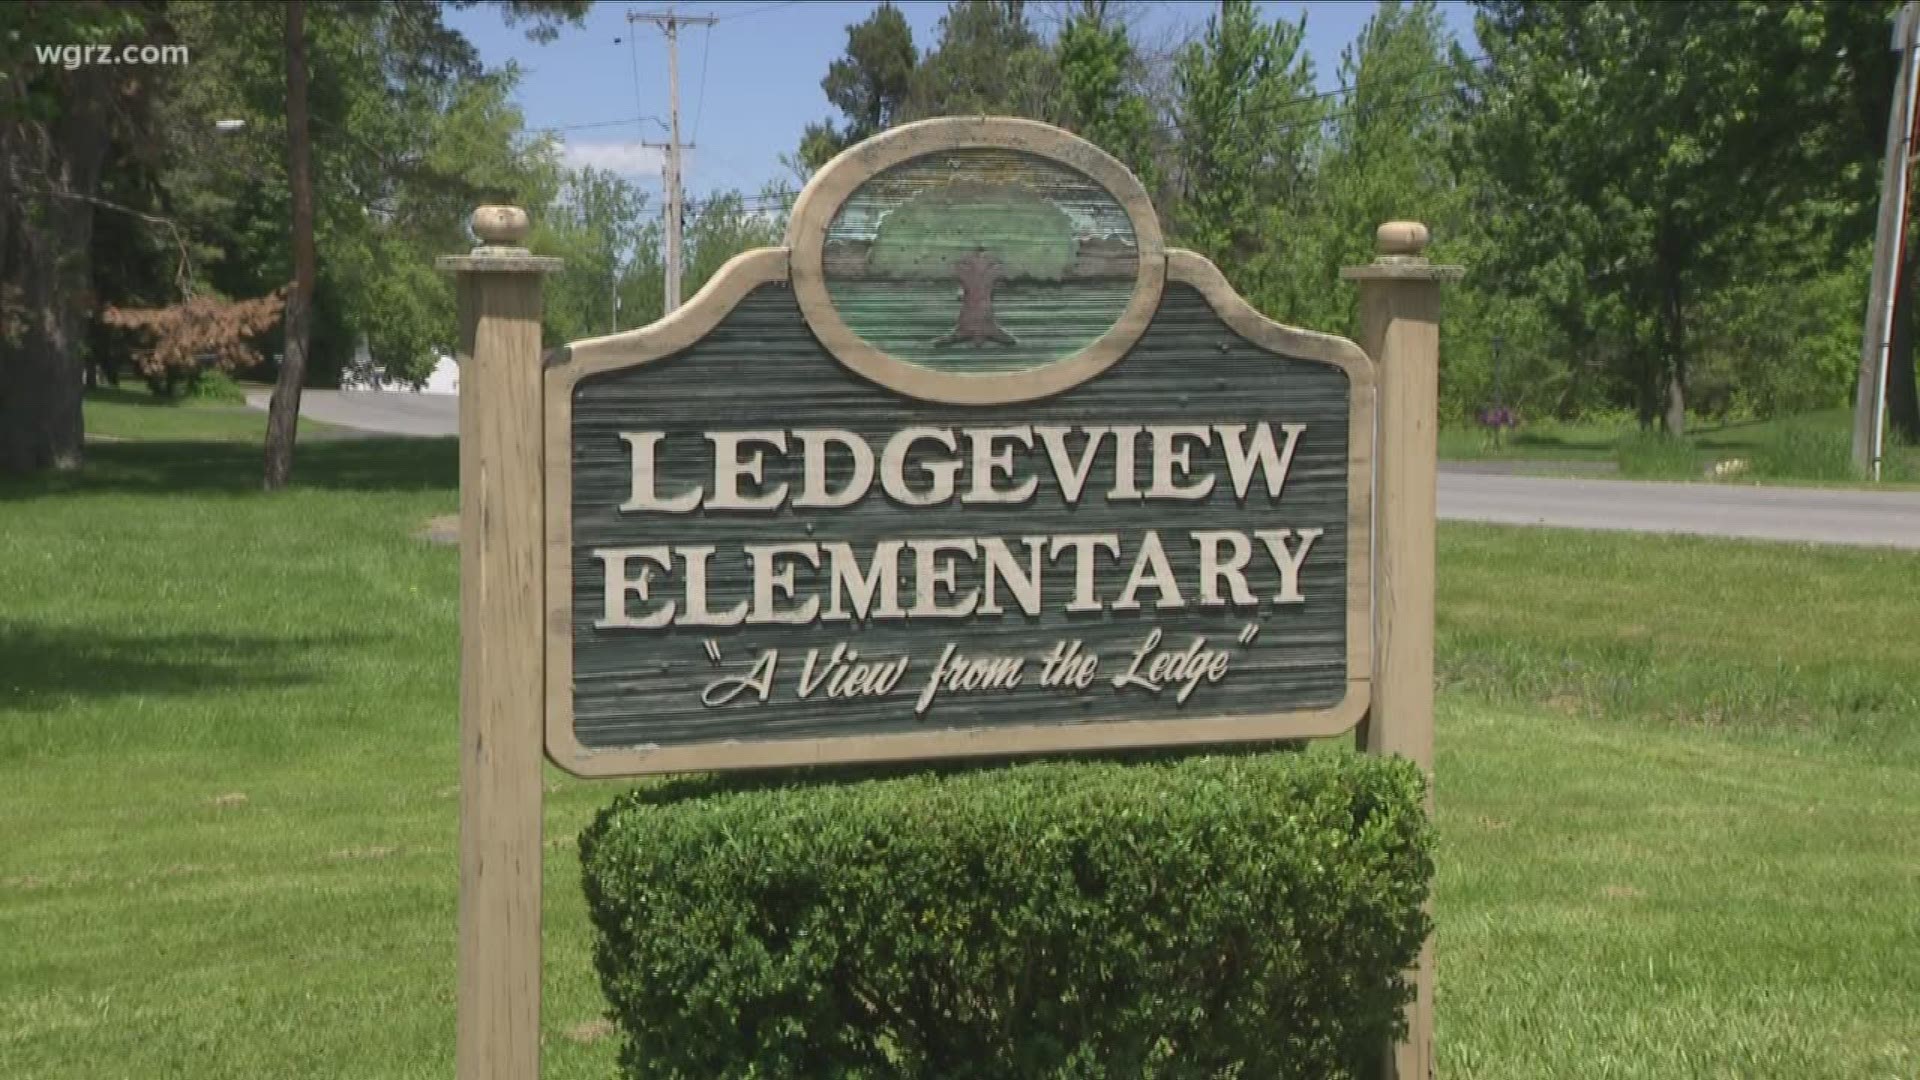 Ledgeview has been in first place for 6 years now.